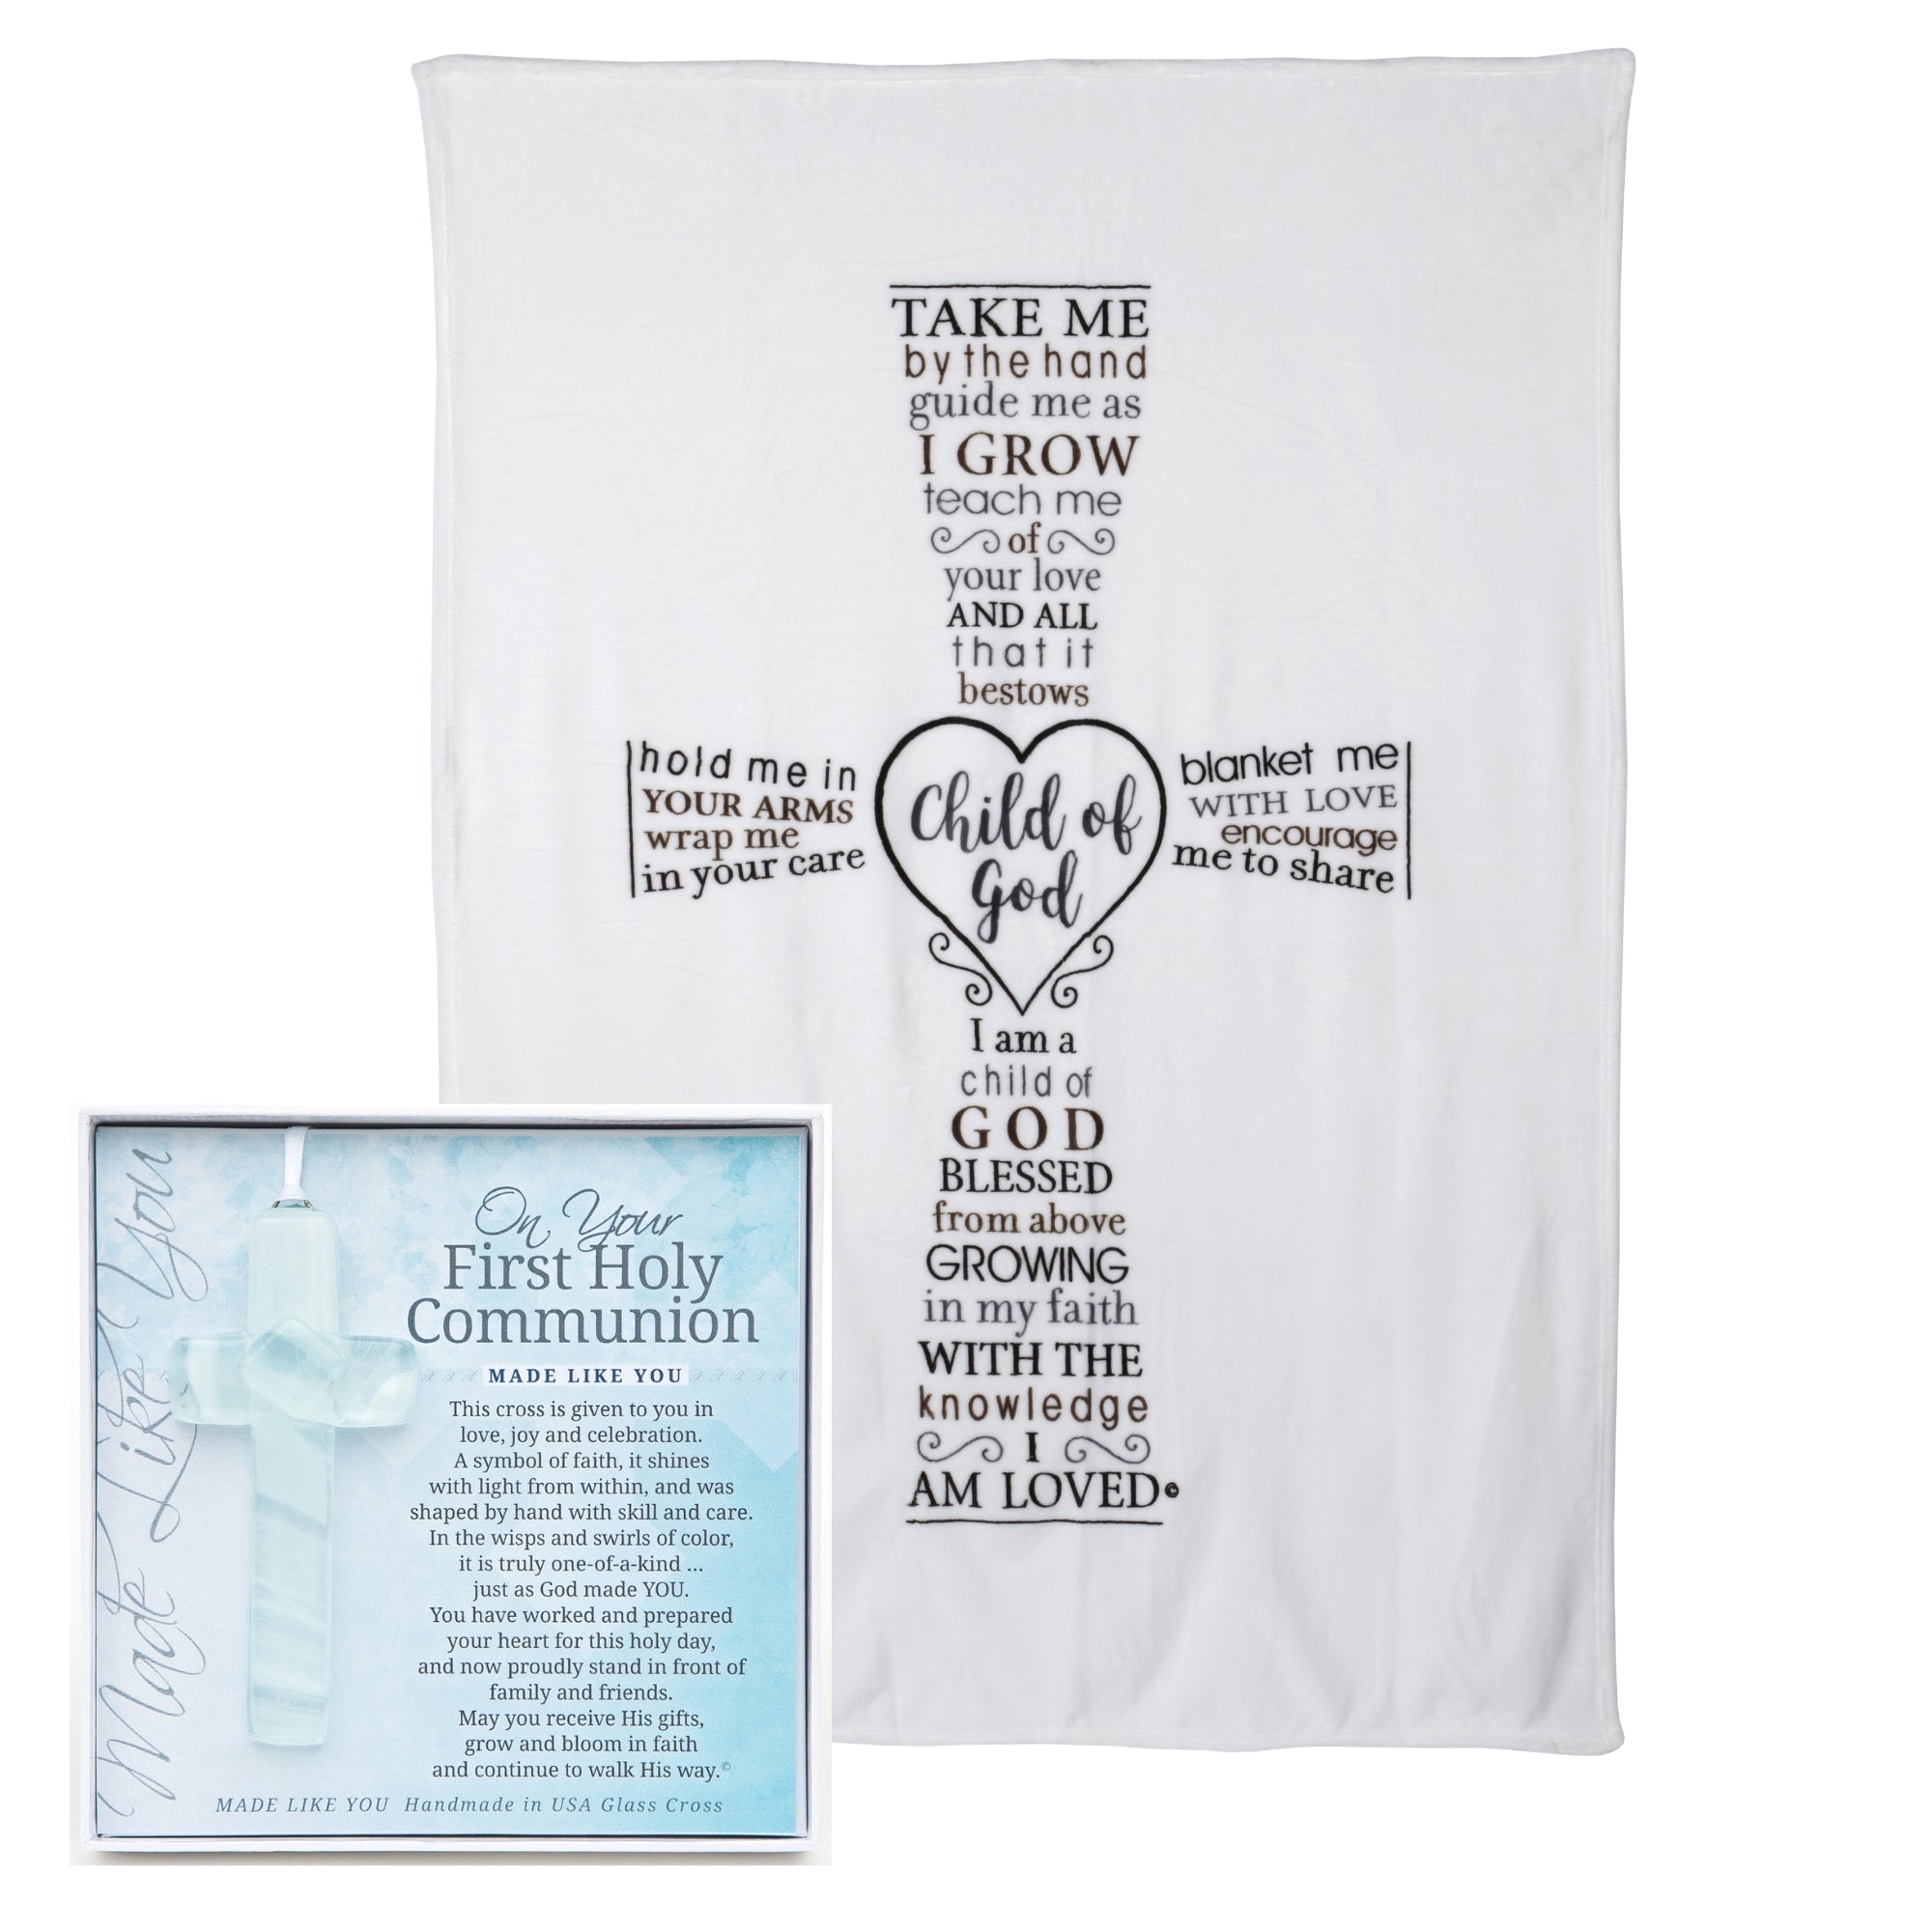 First Communion Gift Set with a Child of God blanket and On Your First Holy Communion glass cross.